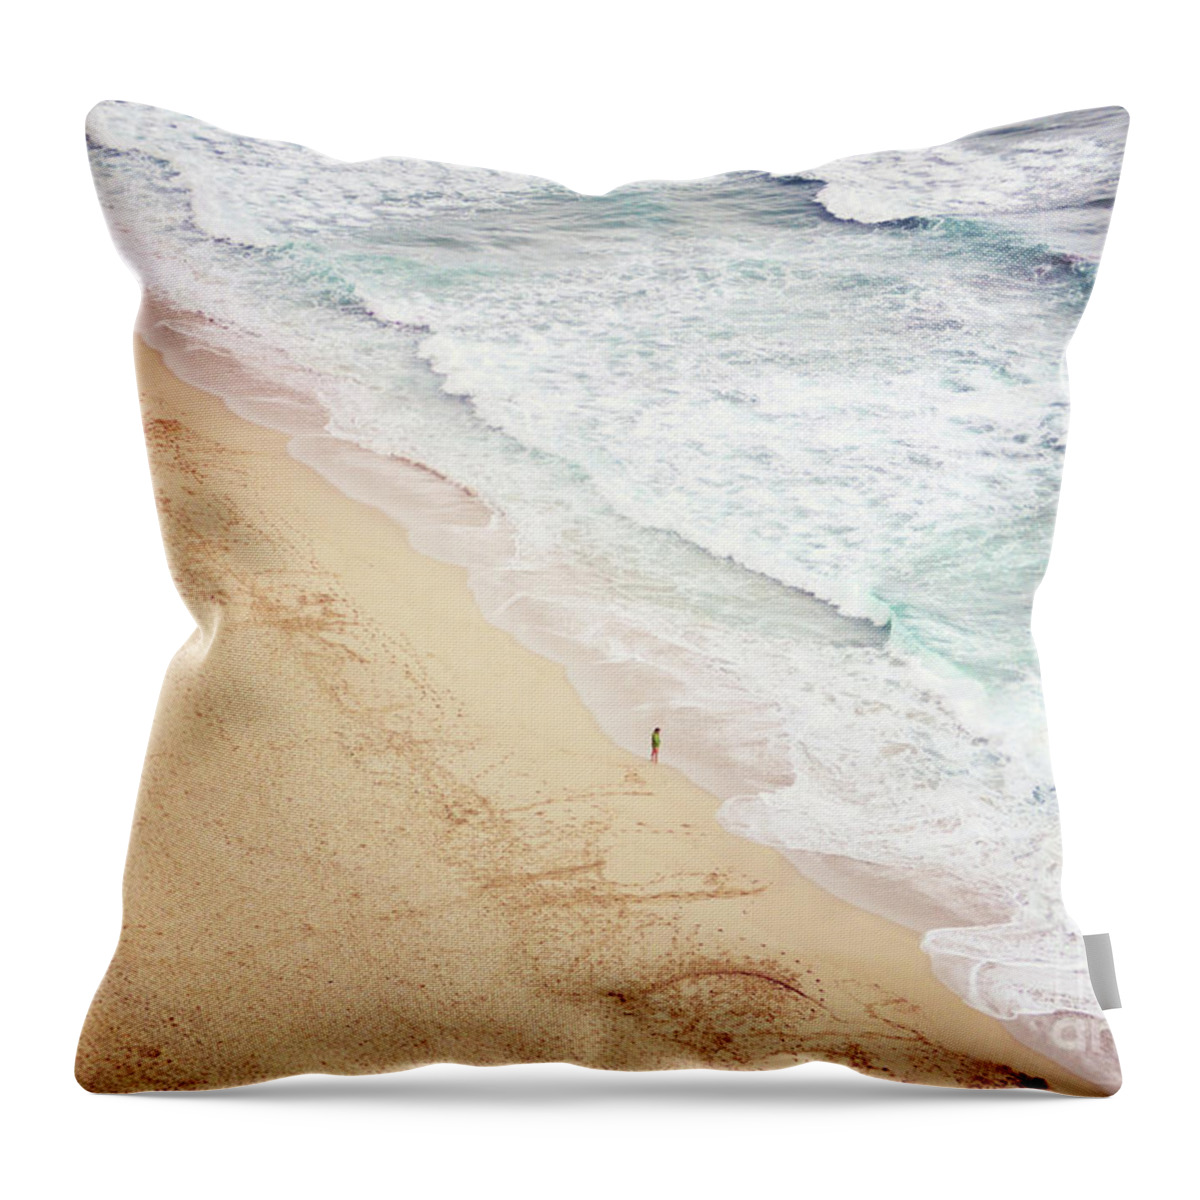 Pedn Vounder Throw Pillow featuring the photograph Pedn Vounder by Lyn Randle